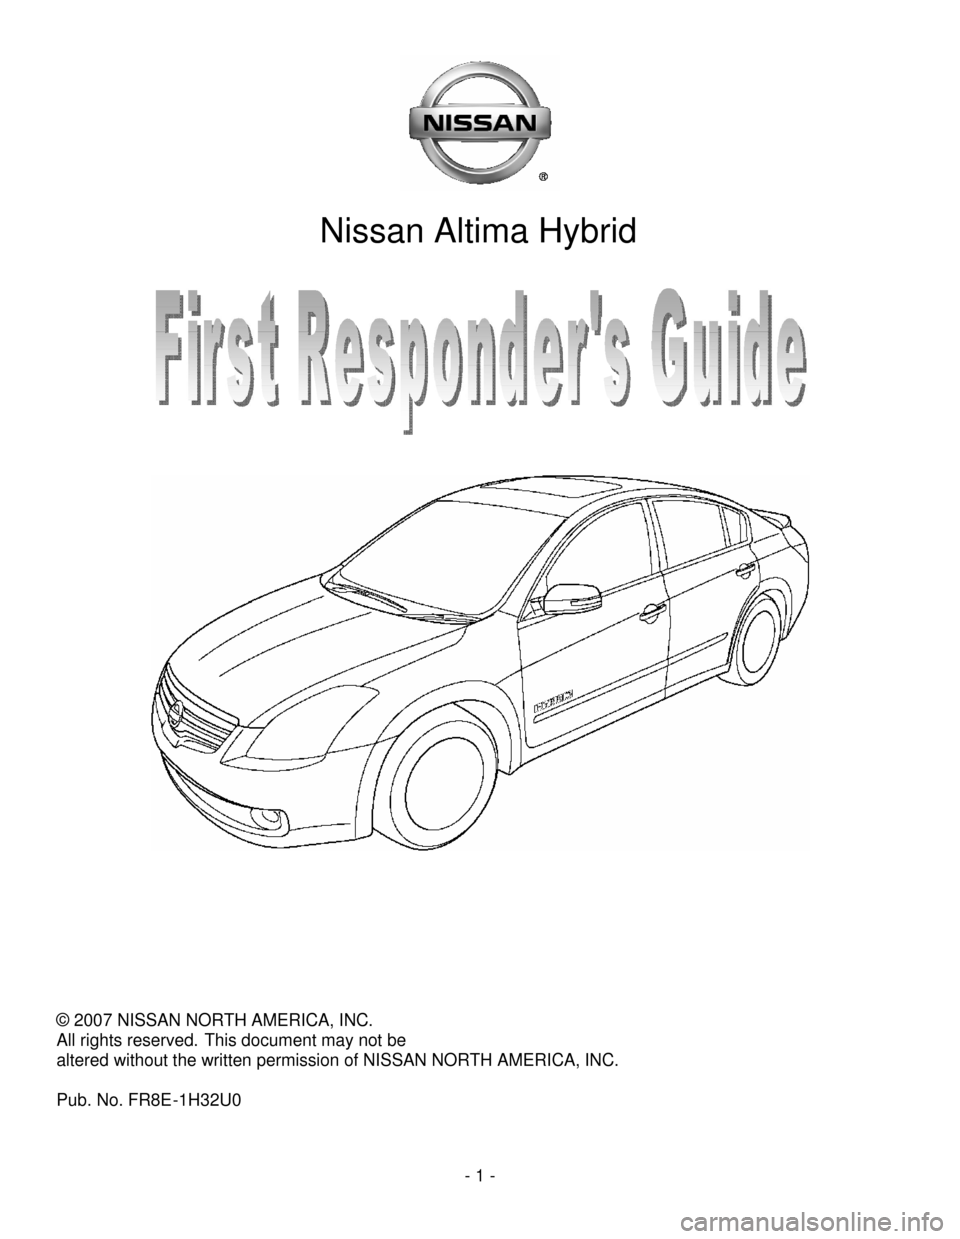 NISSAN ALTIMA HYBRID 2008 L32A / 4.G First Responders Guide 